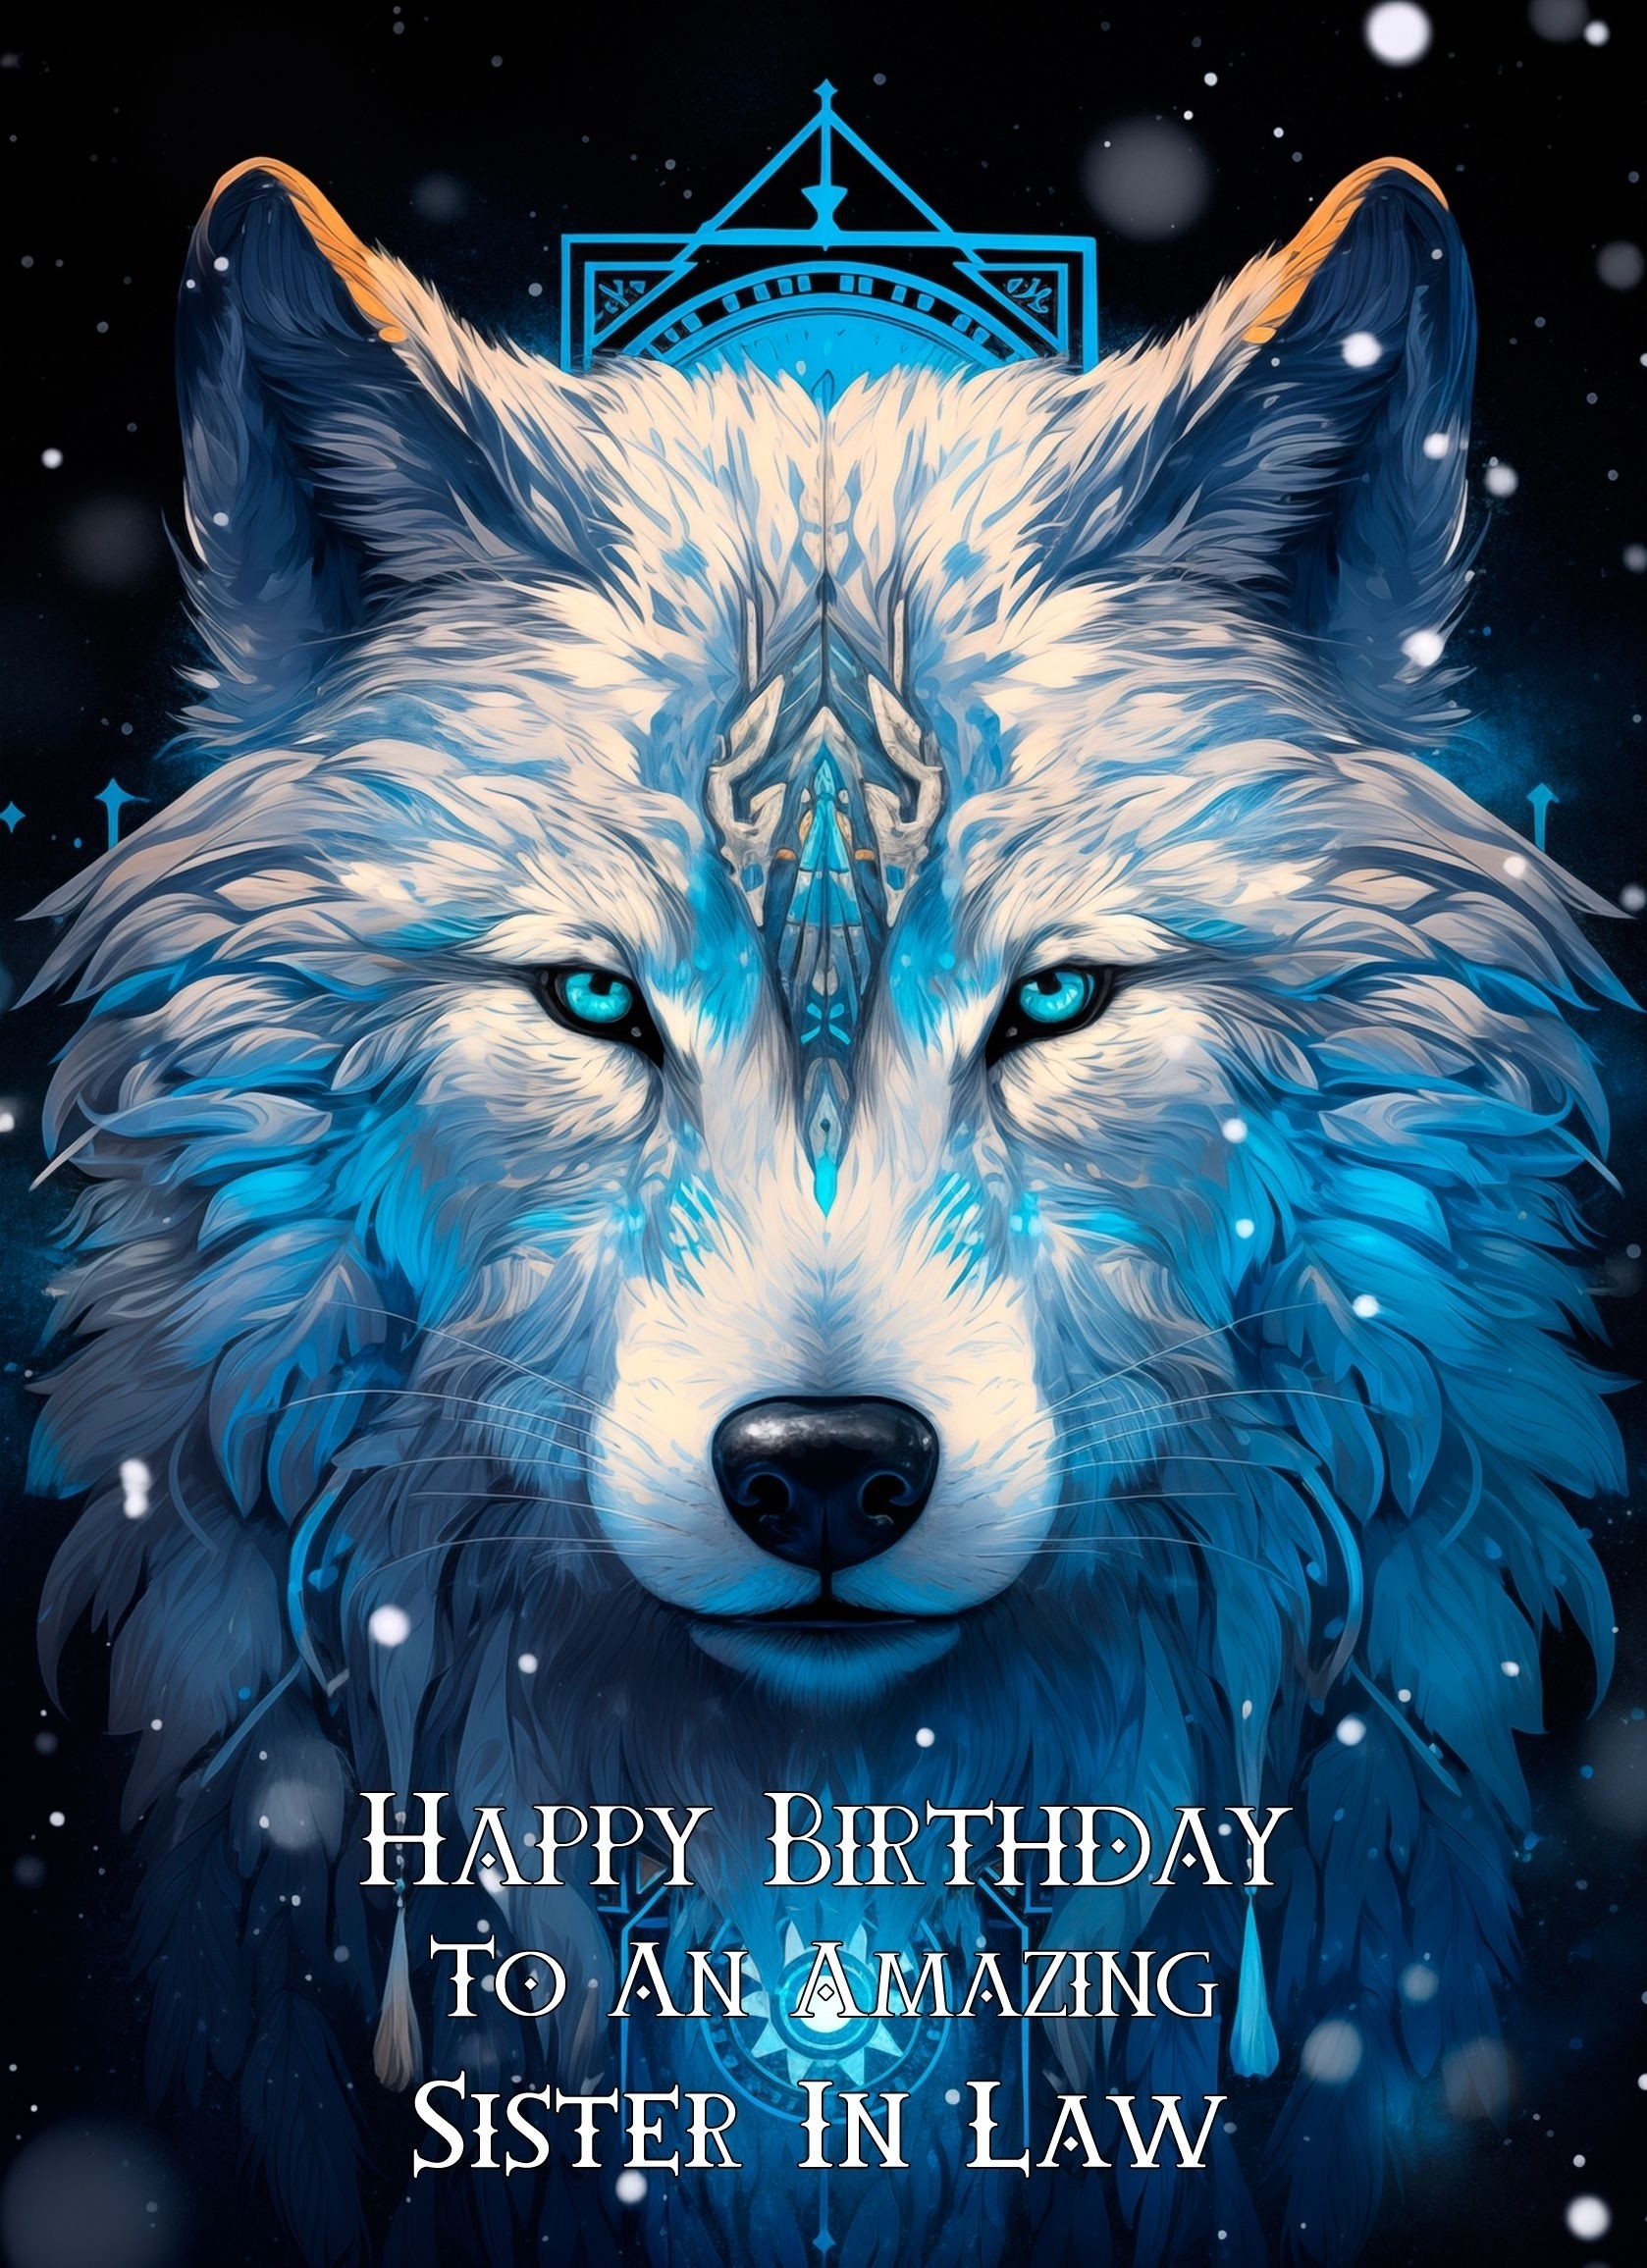 Tribal Wolf Art Birthday Card For Sister in Law (Design 2)